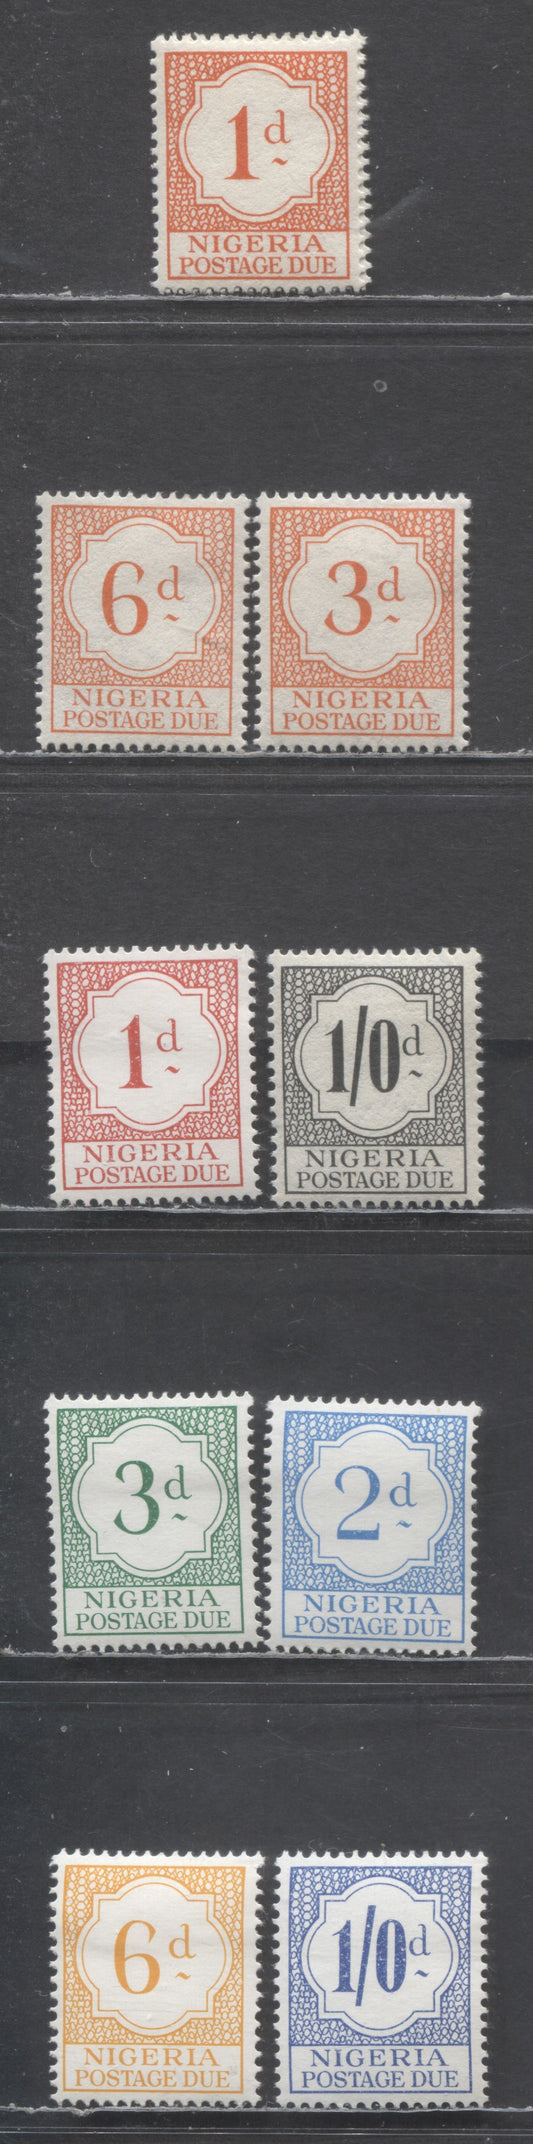 Nigeria SC#J1-J10 1959-1961 Postage Dues, 9 VFOG Singles, Click on Listing to See ALL Pictures, Estimated Value $3